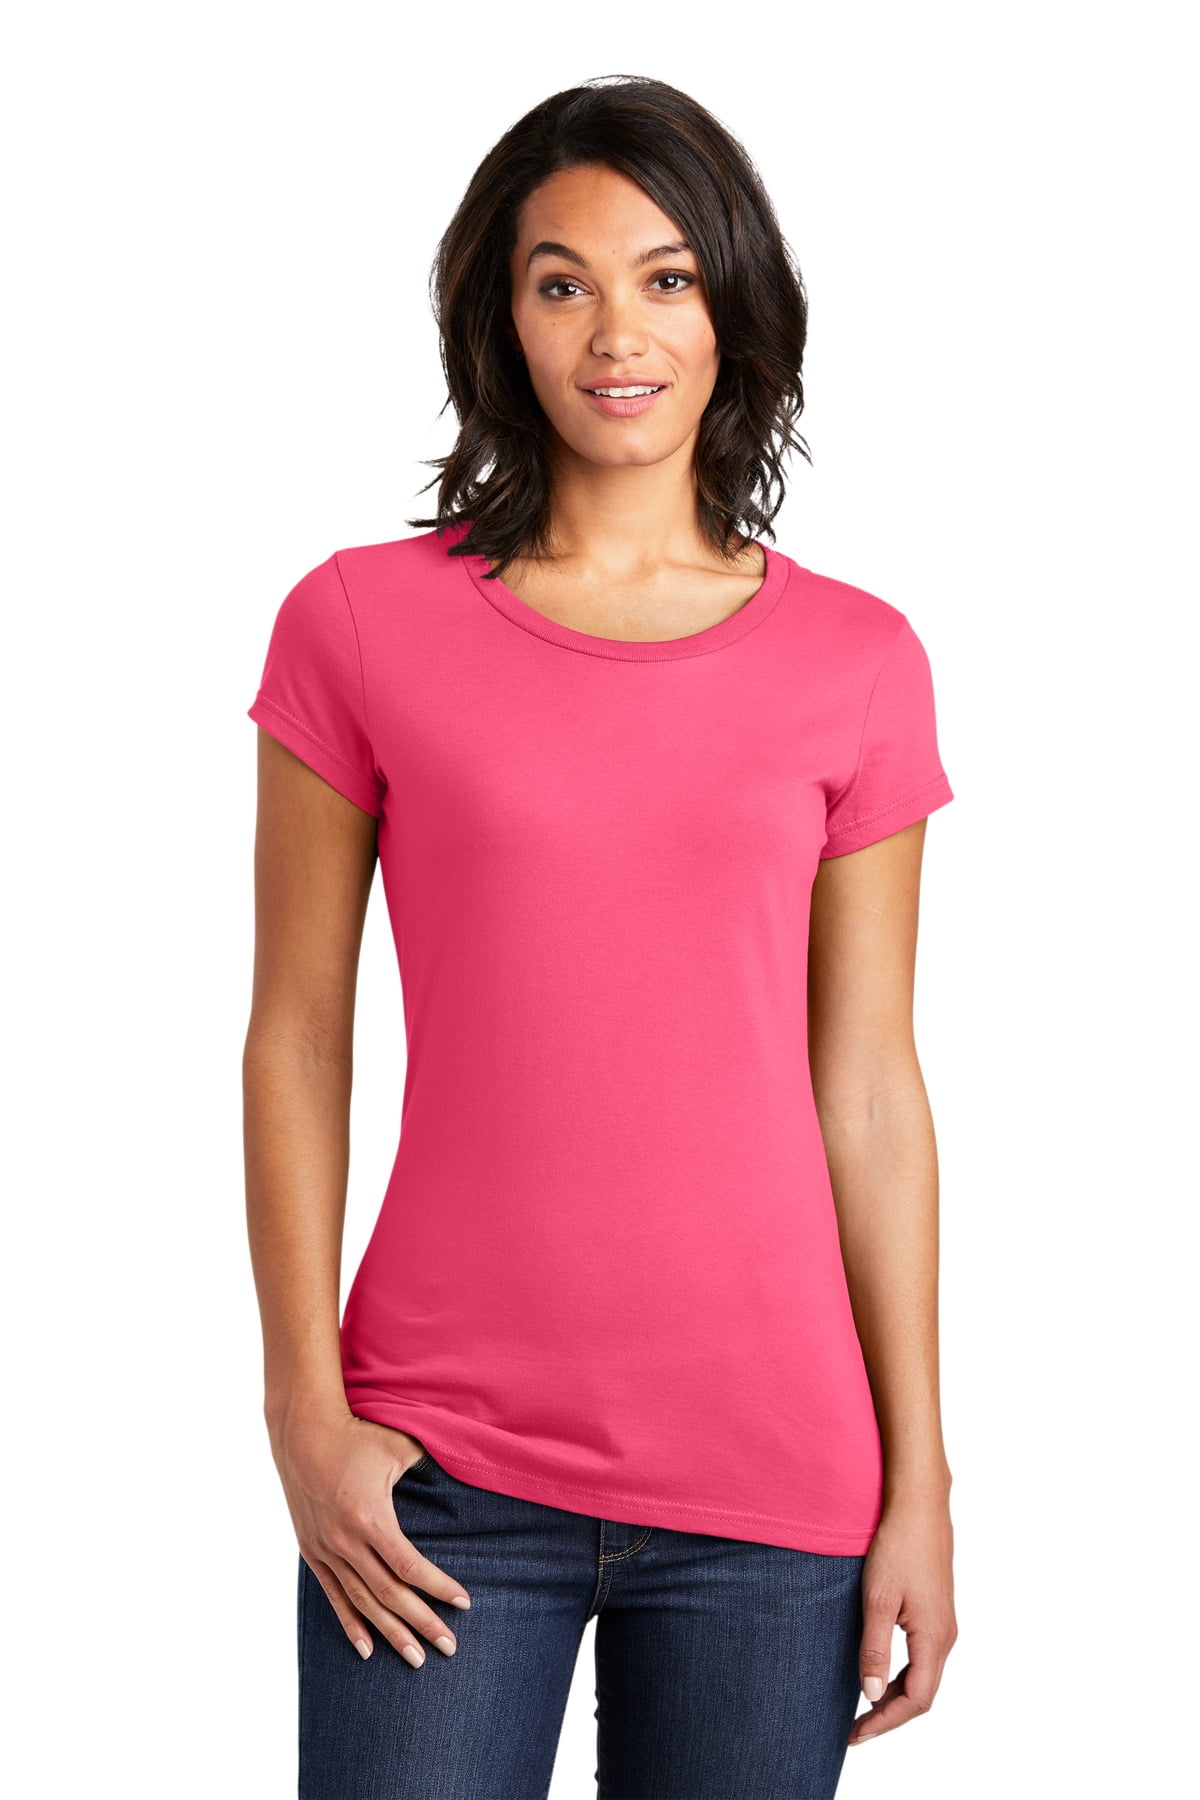 District DT6001 Juniors Very Important Tee , Neon Pink, L